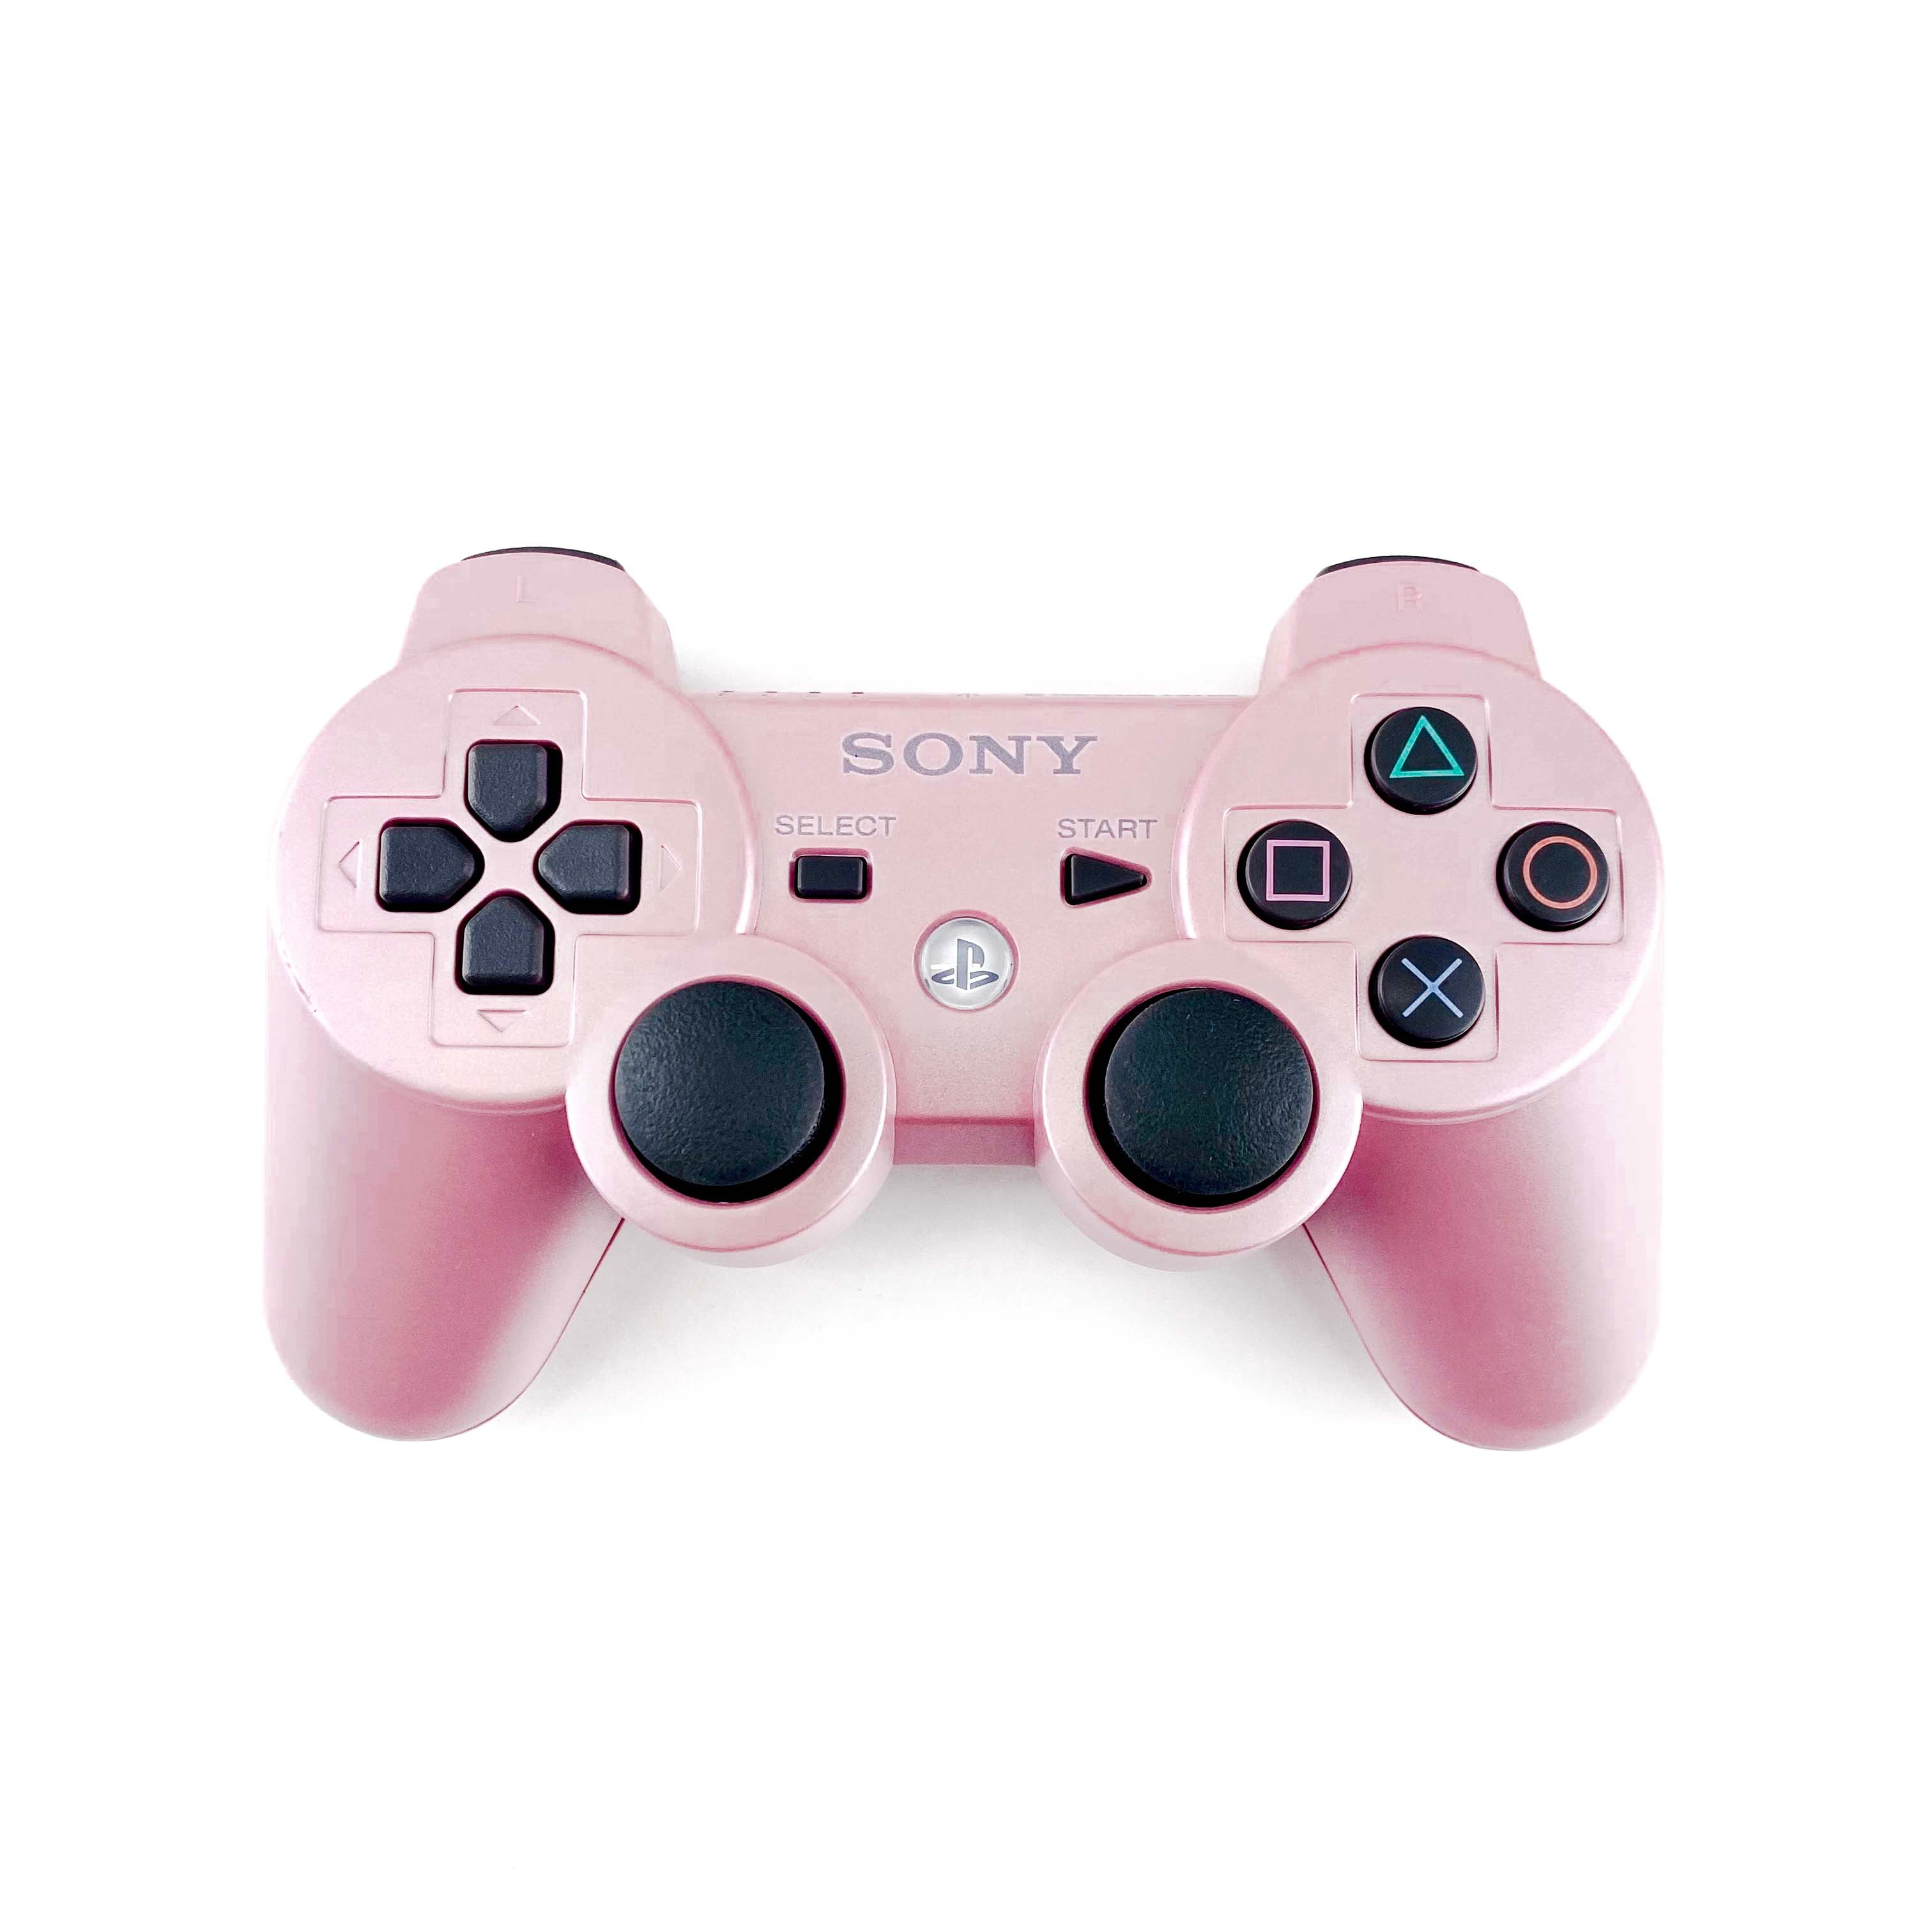 Sony PlayStation 3 PS3 DualShock 3 Pink Wireless Controller